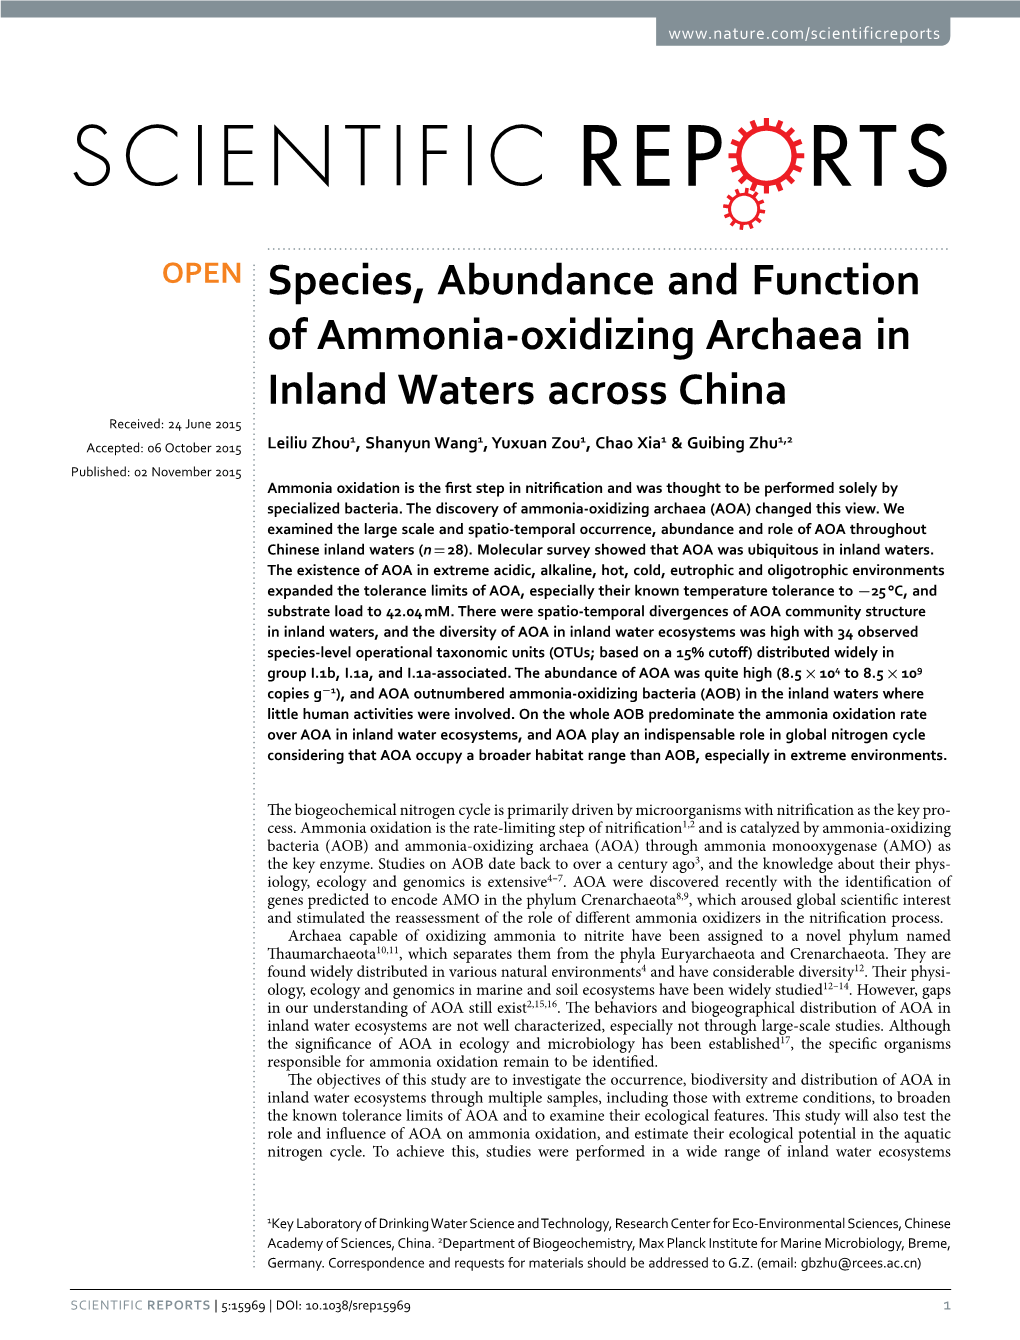 Species, Abundance and Function of Ammonia-Oxidizing Archaea in Inland Waters Across China